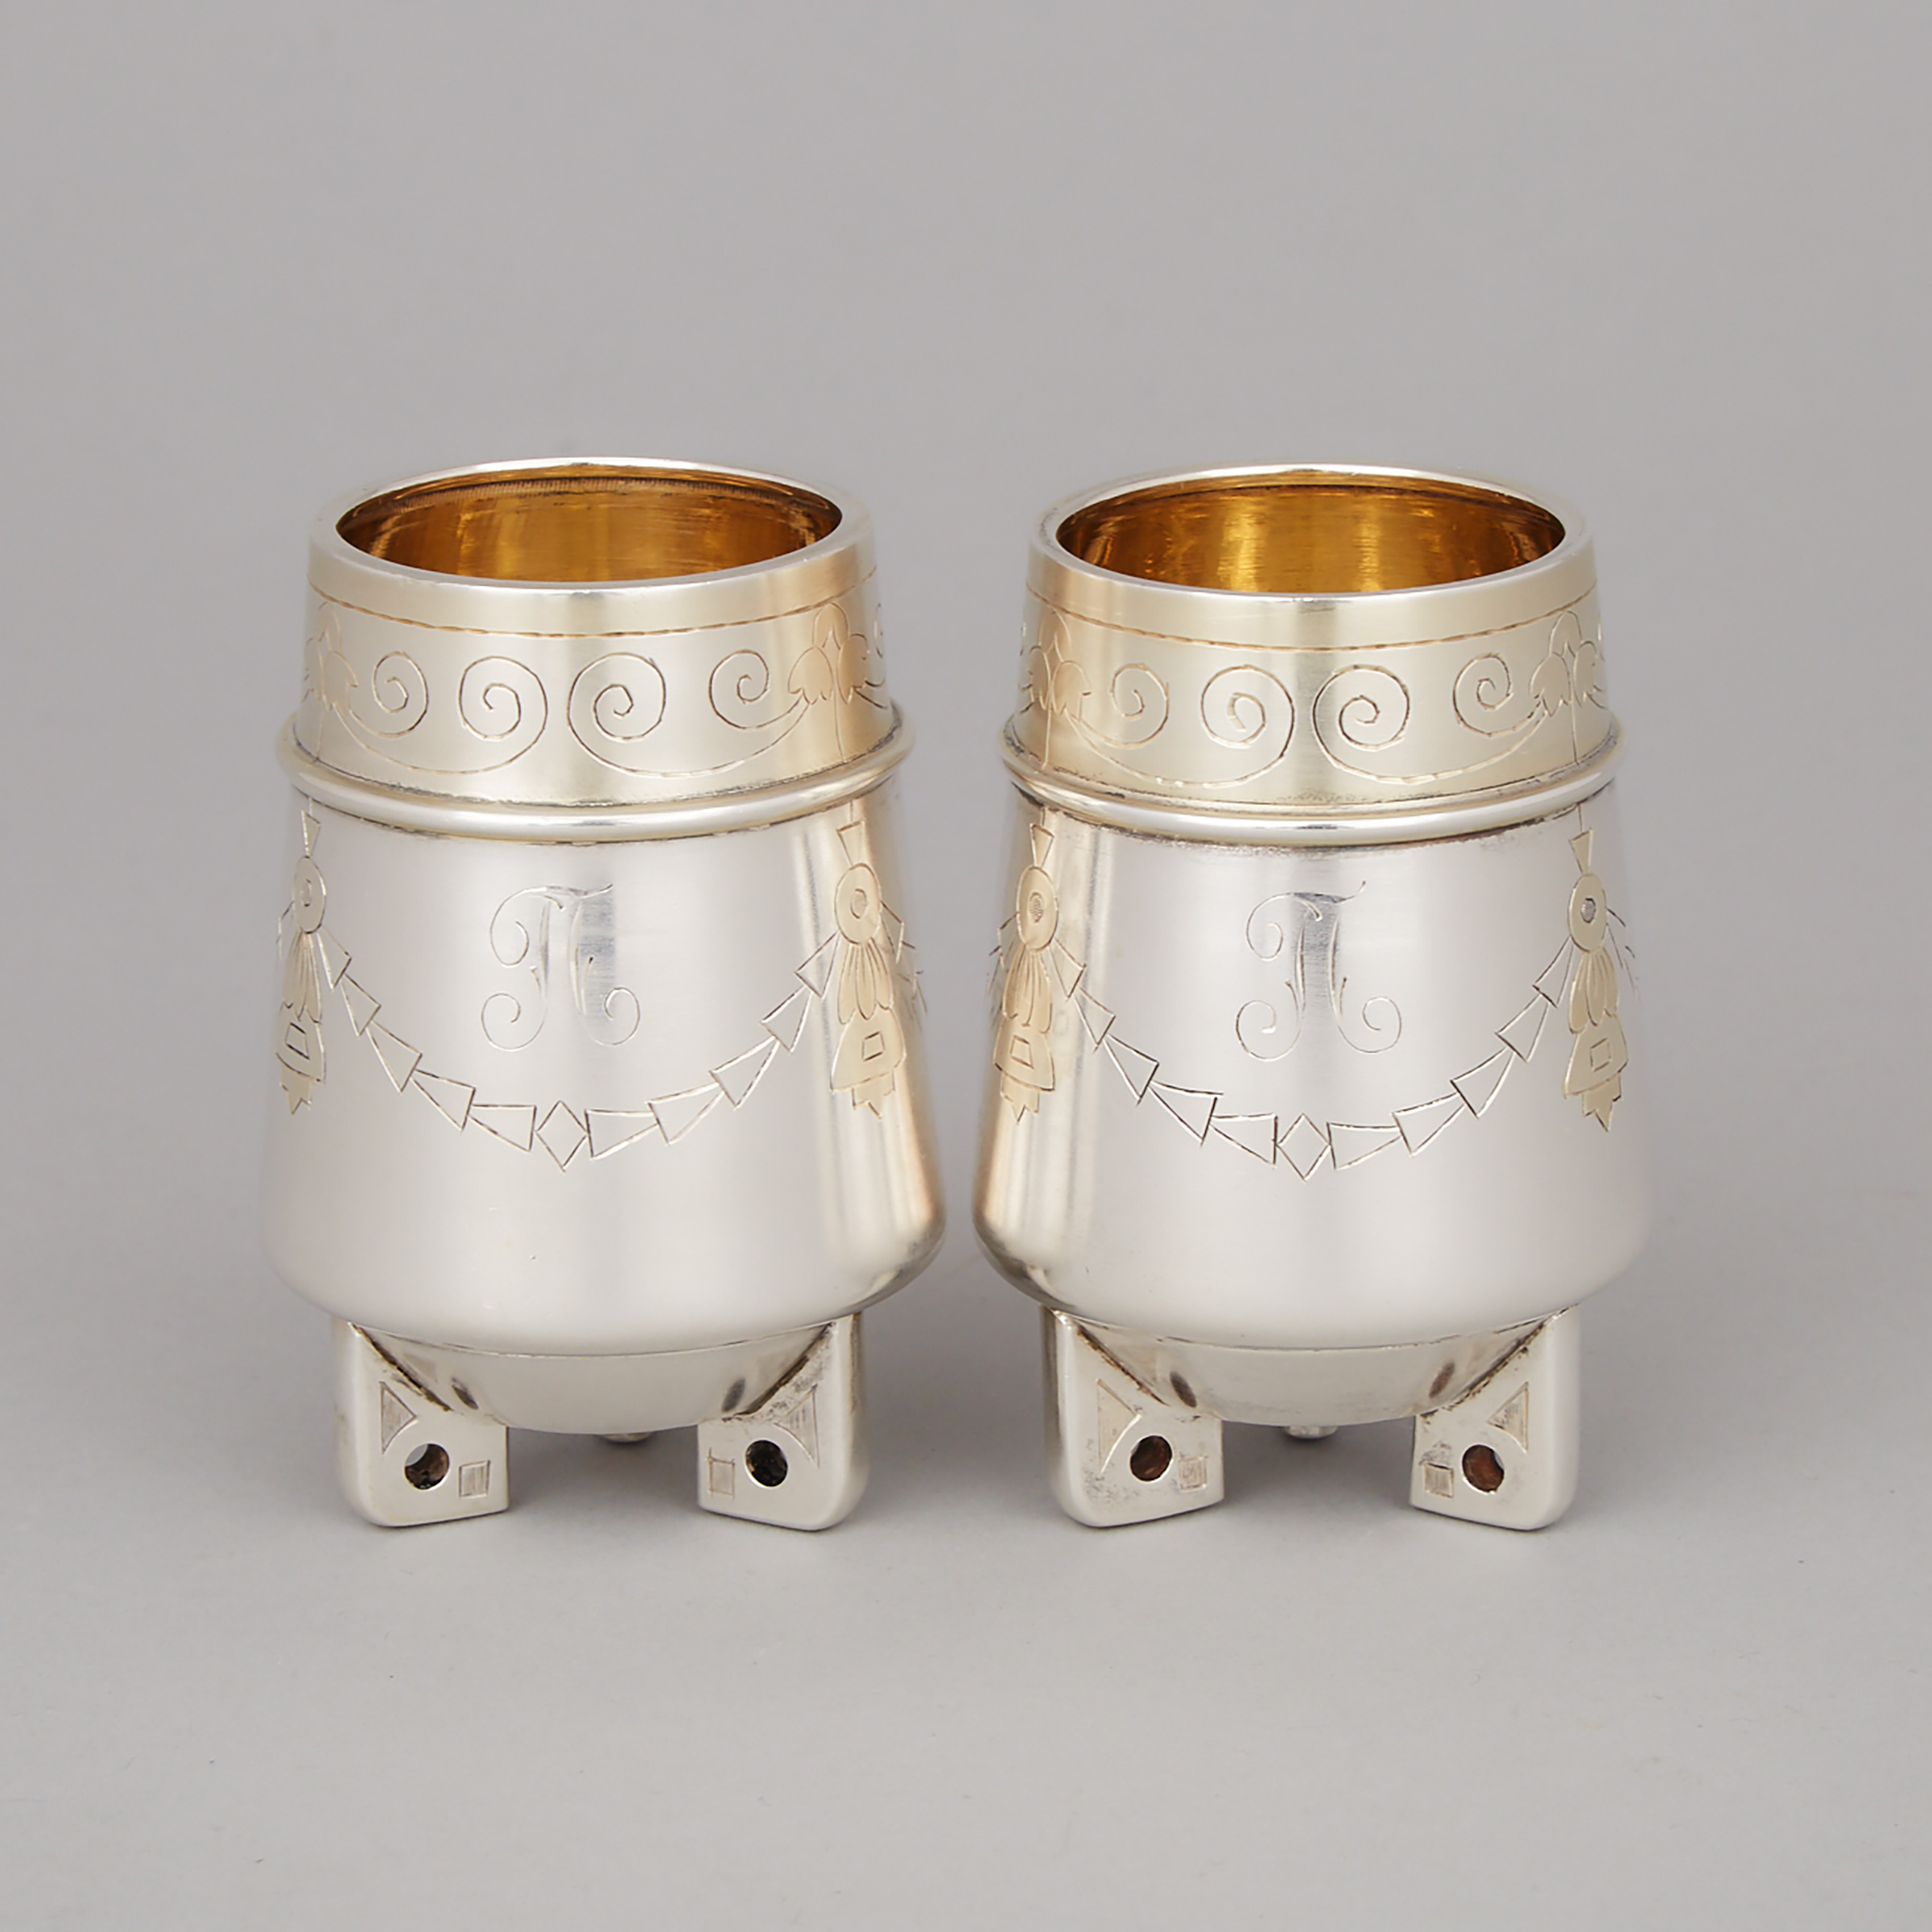 Pair of Russian Silver Small Vases, Ivan Khlebnikov, Moscow, c.1908-17